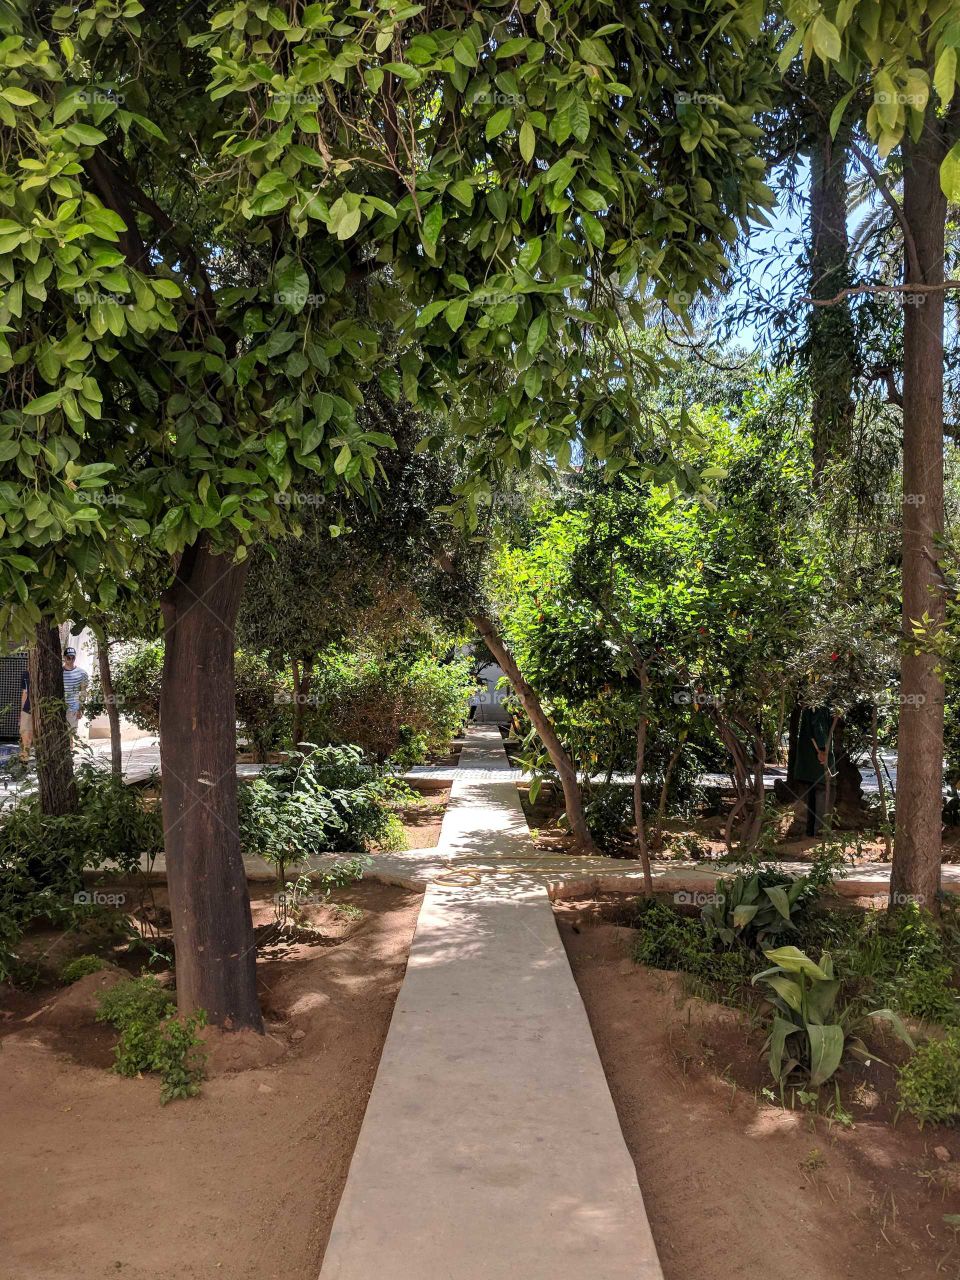 Walking and Strolling on a Paved Path into a Garden full of Green Trees in the Summer at the Bahia Palace in Marrakech in Morocco